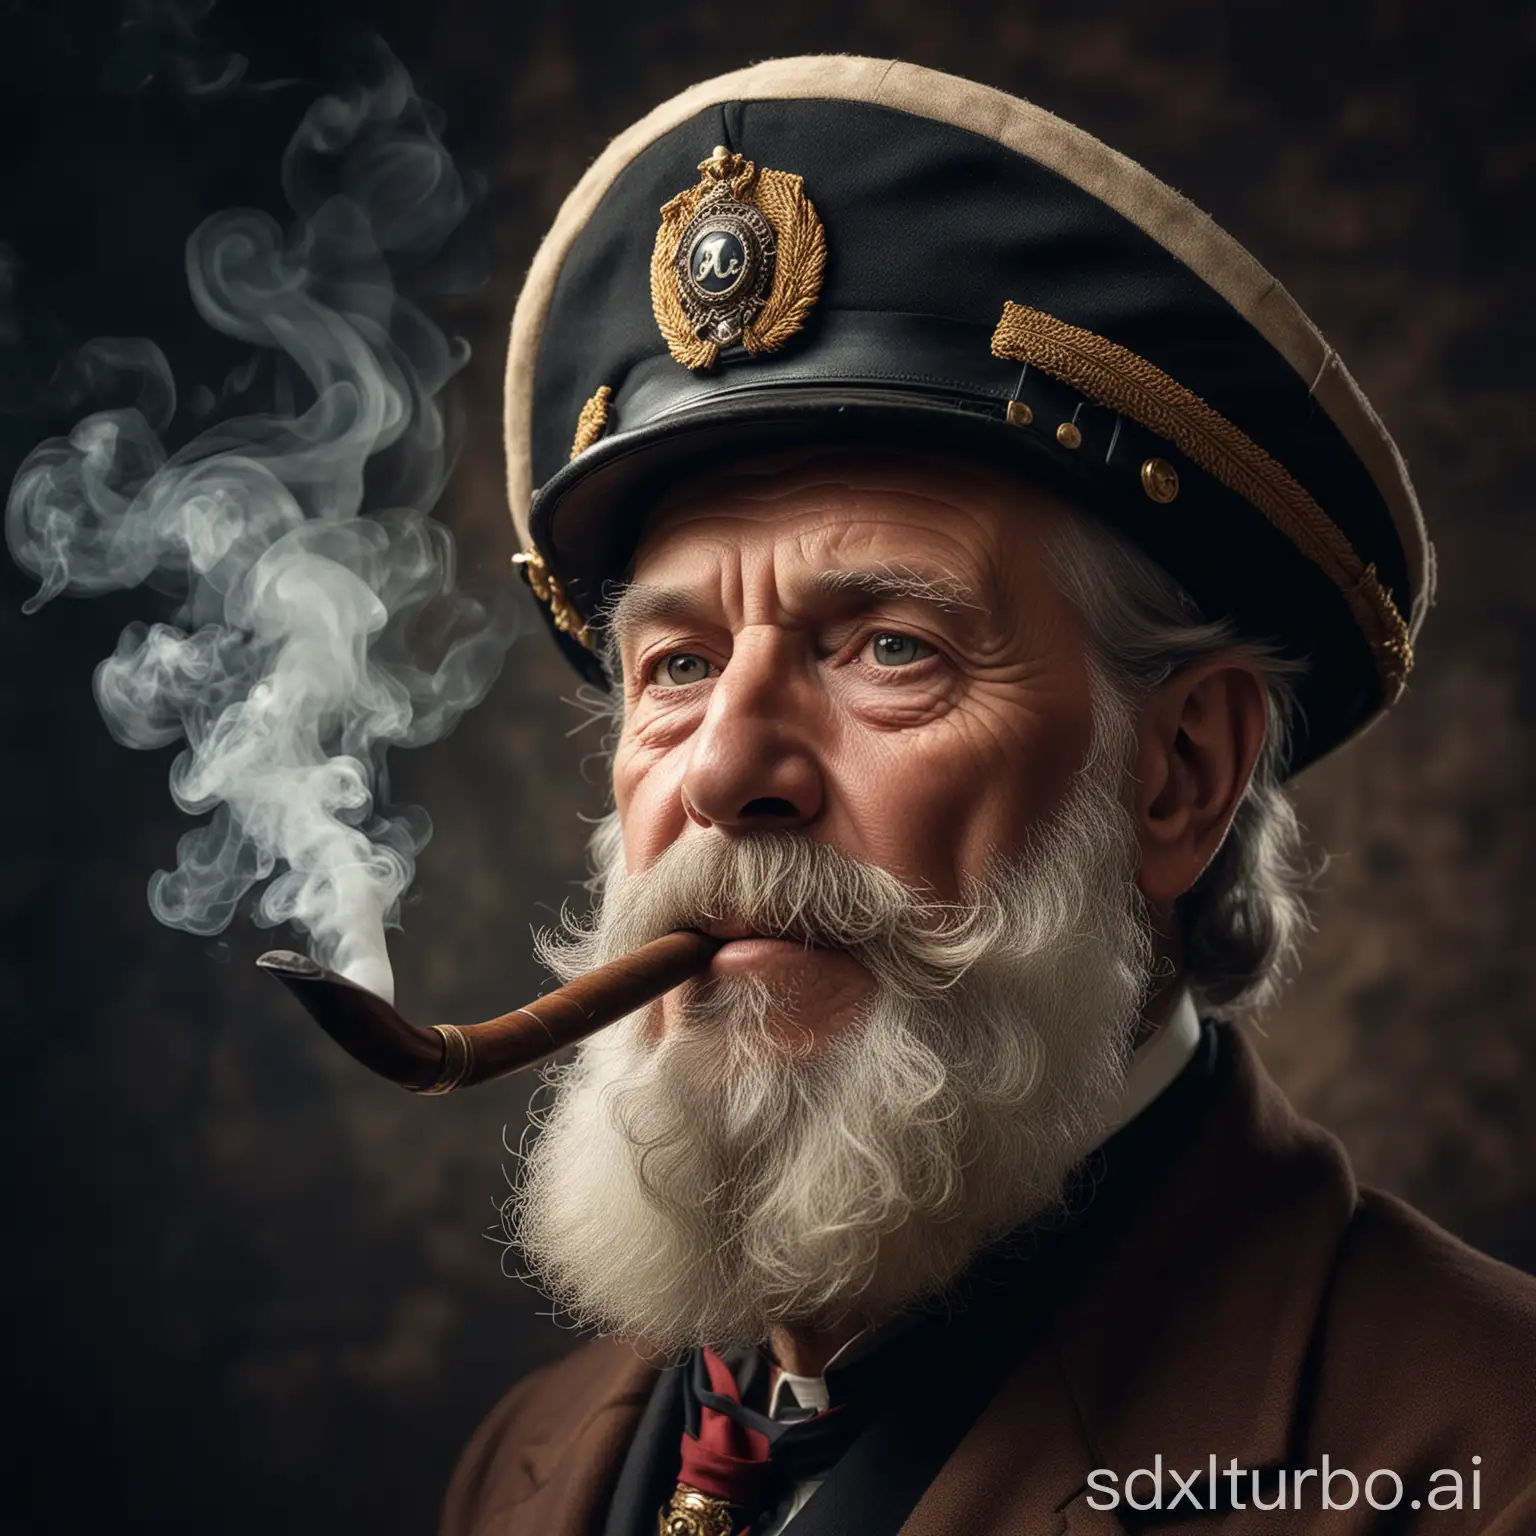 Photo super sharp. Portrait of an old captain with a pipe in his mouth and a captain's hat. He is supposed to have a full beard, his face is wrinkled. Smoke rises from the tobacco pipe.